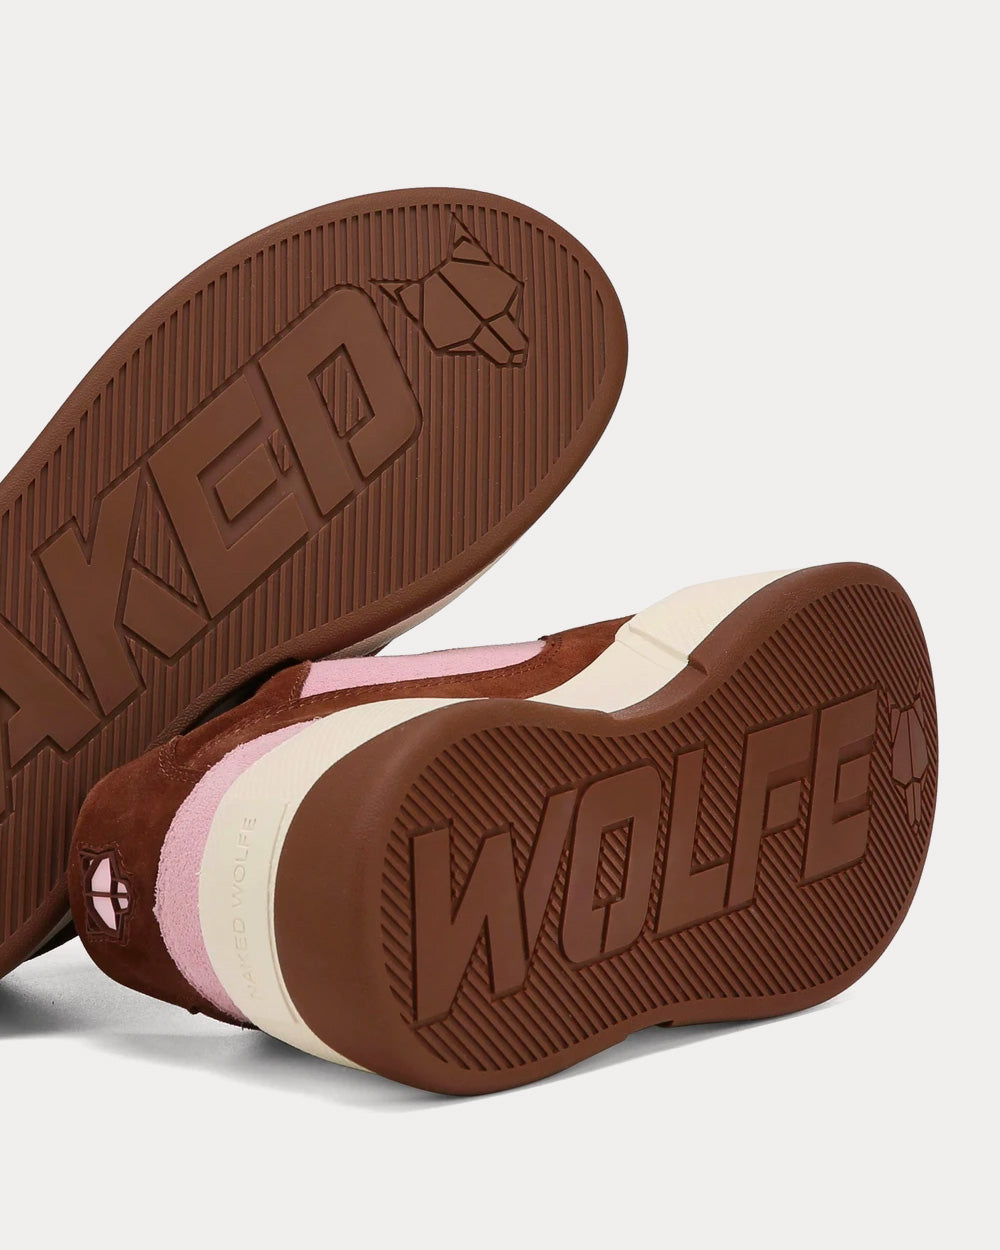 Naked Wolfe - City Brown / Pink Low Top Sneakers